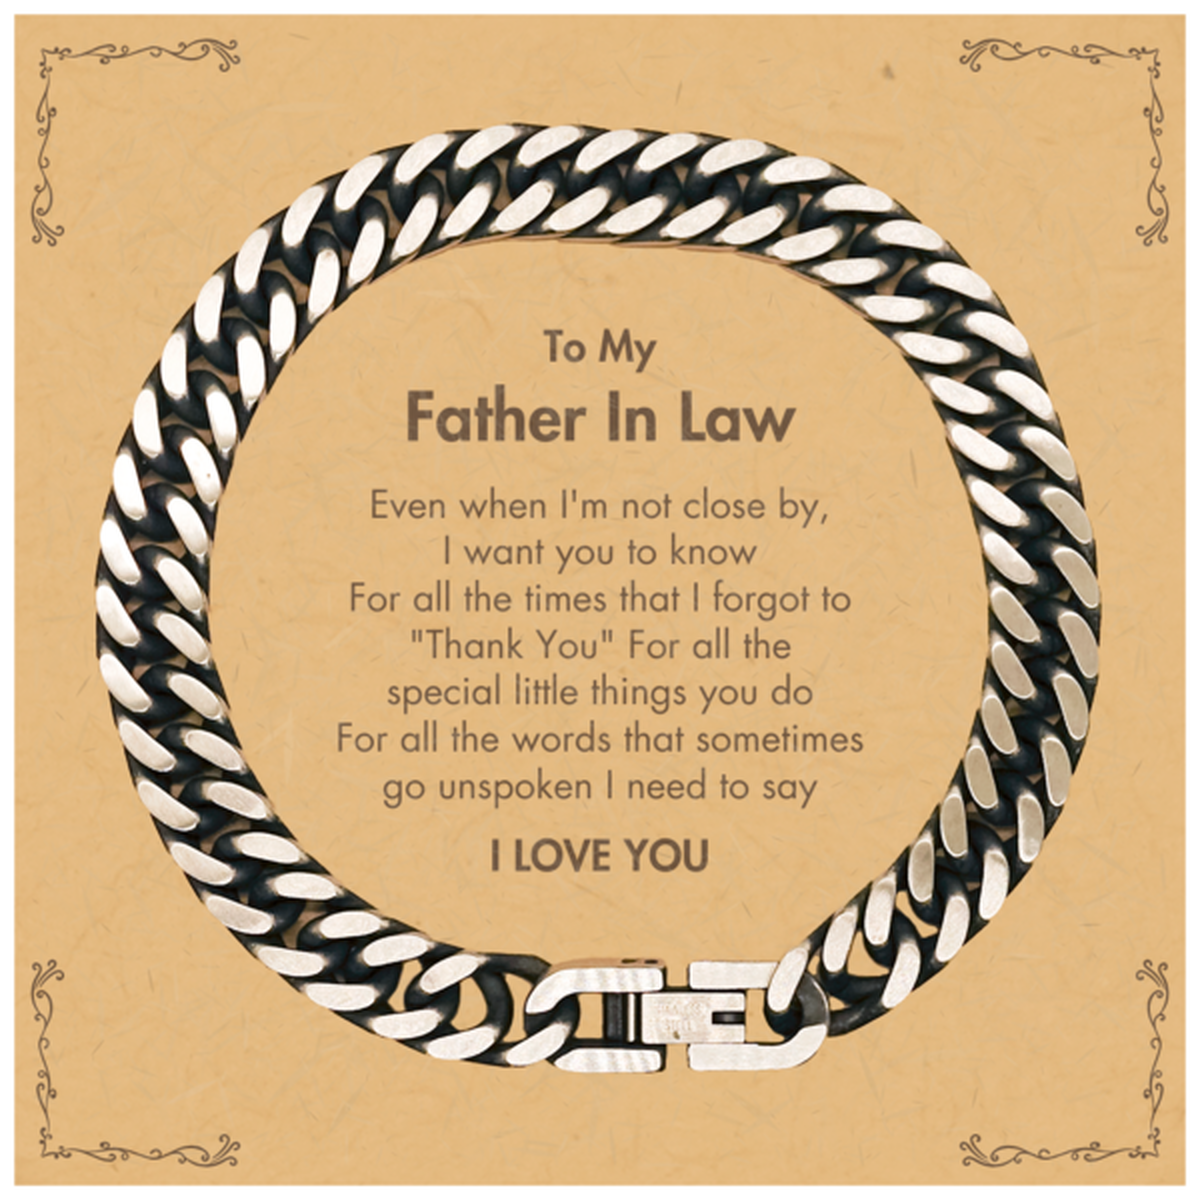 Thank You Gifts for Father In Law, Keepsake Cuban Link Chain Bracelet Gifts for Father In Law Birthday Mother's day Father's Day Father In Law For all the words That sometimes go unspoken I need to say I LOVE YOU